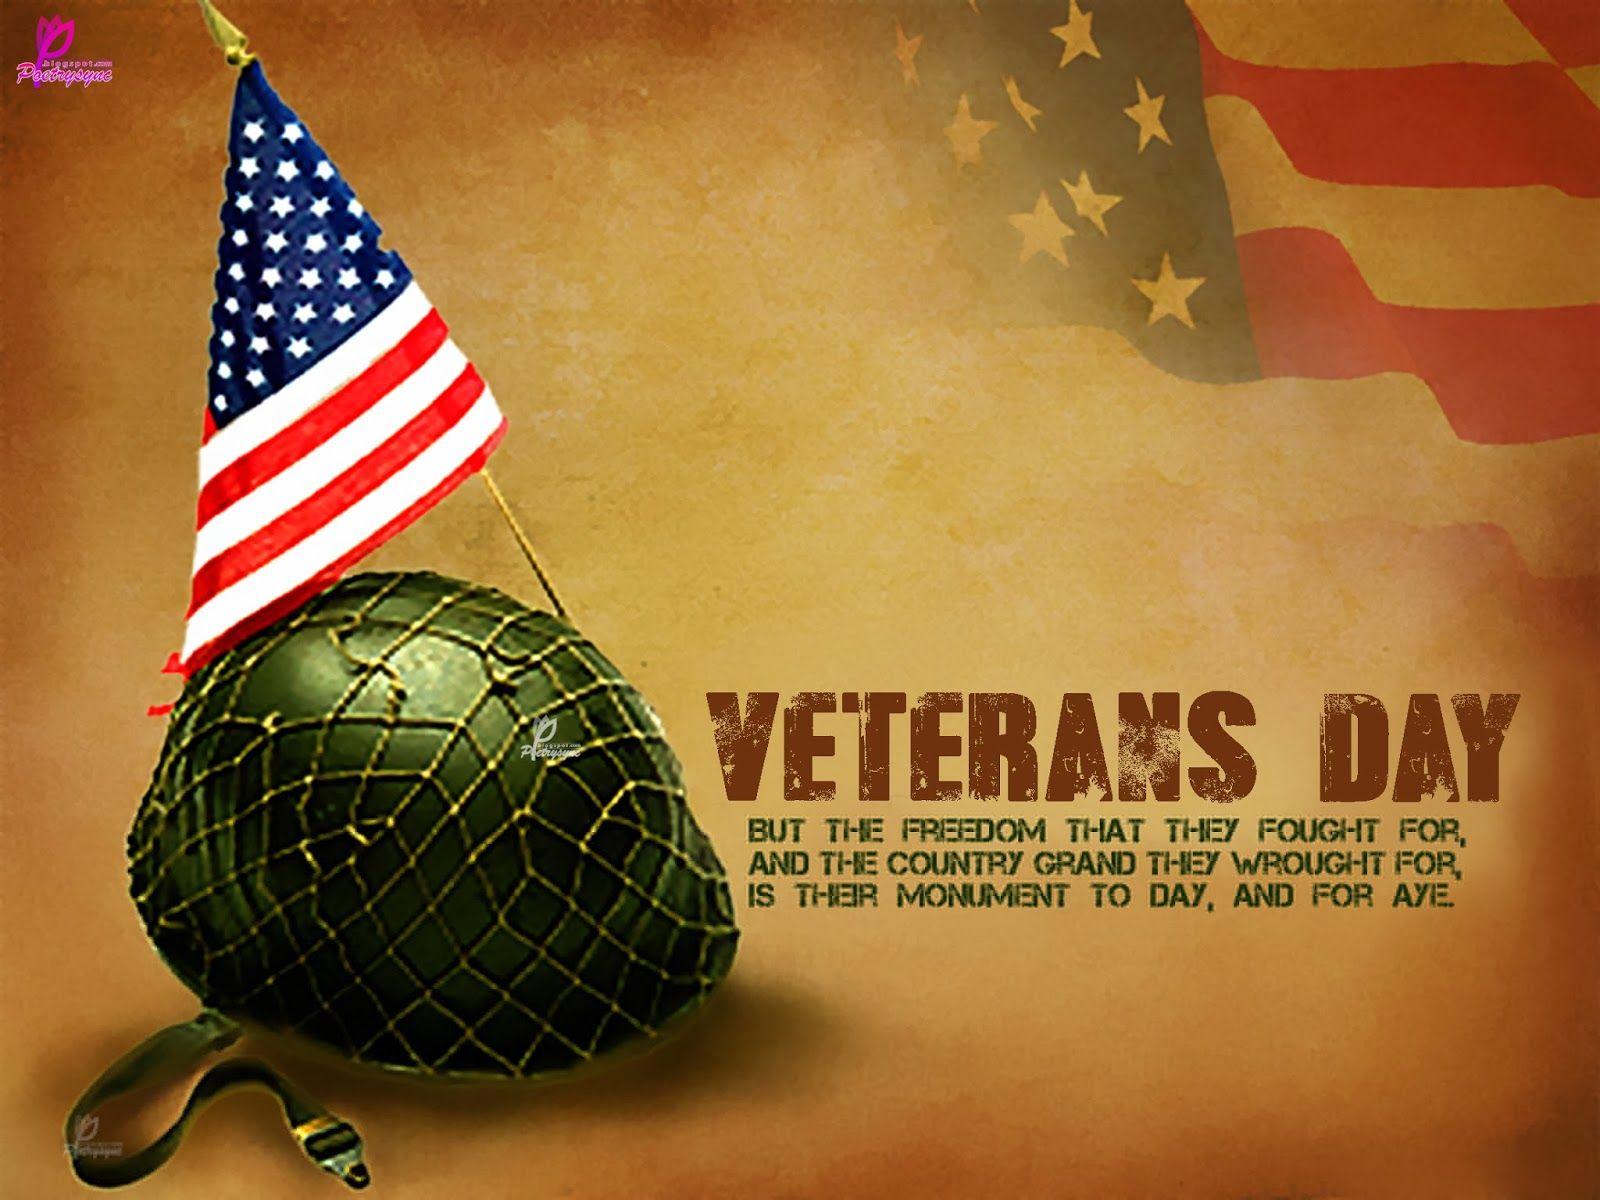 Veterans Day Wallpaper for iPhone & Background. Happy